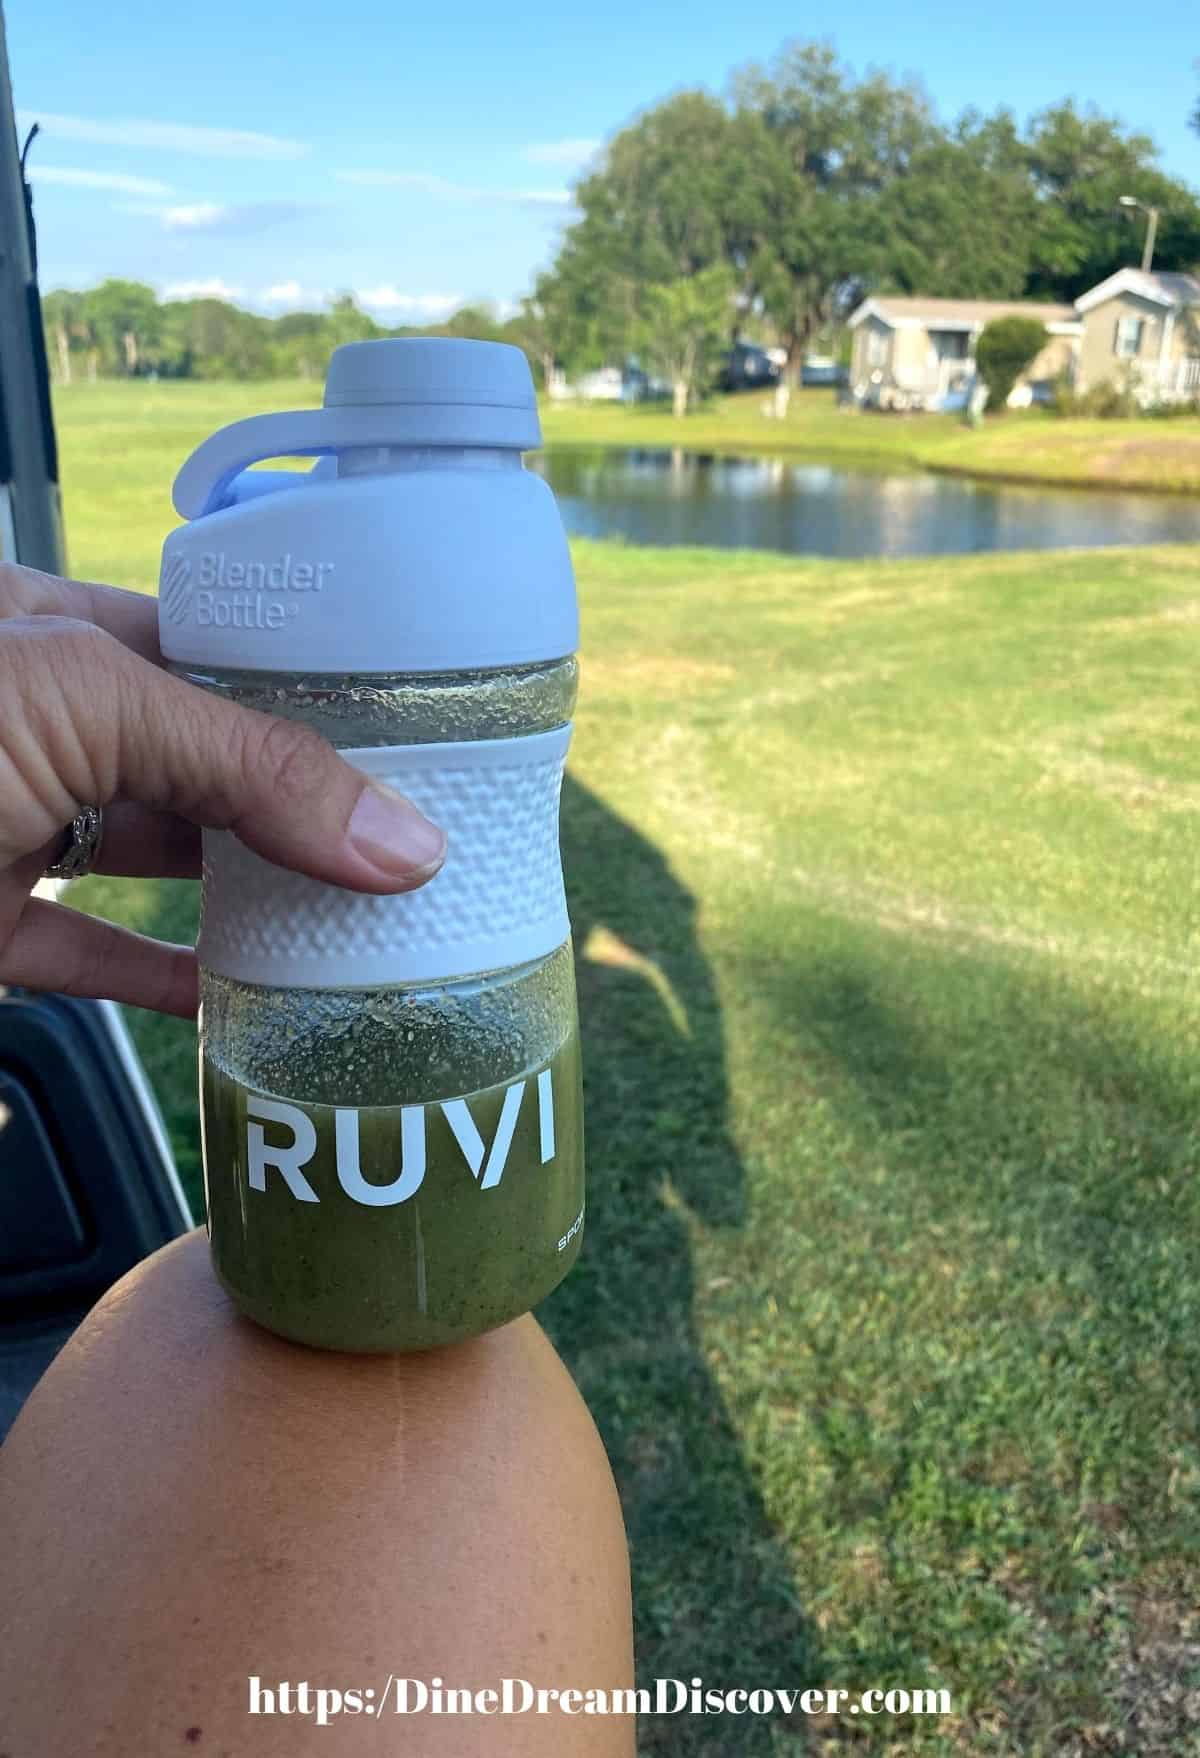 RUVI - The Easy Way to Add Fruits and Vegetables